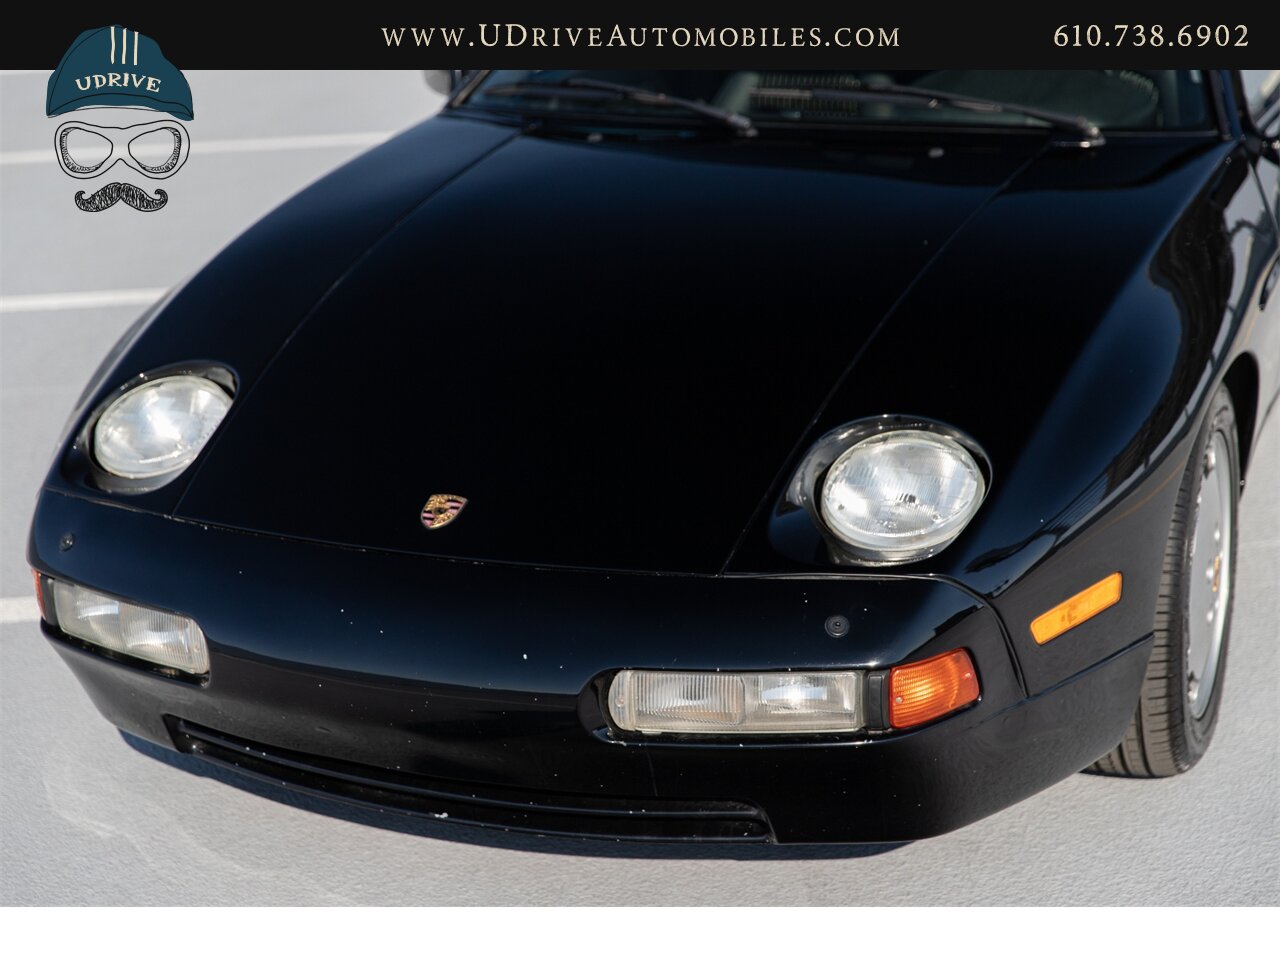 1990 Porsche 928 S4 $58k in Service History Since 2014   - Photo 8 - West Chester, PA 19382